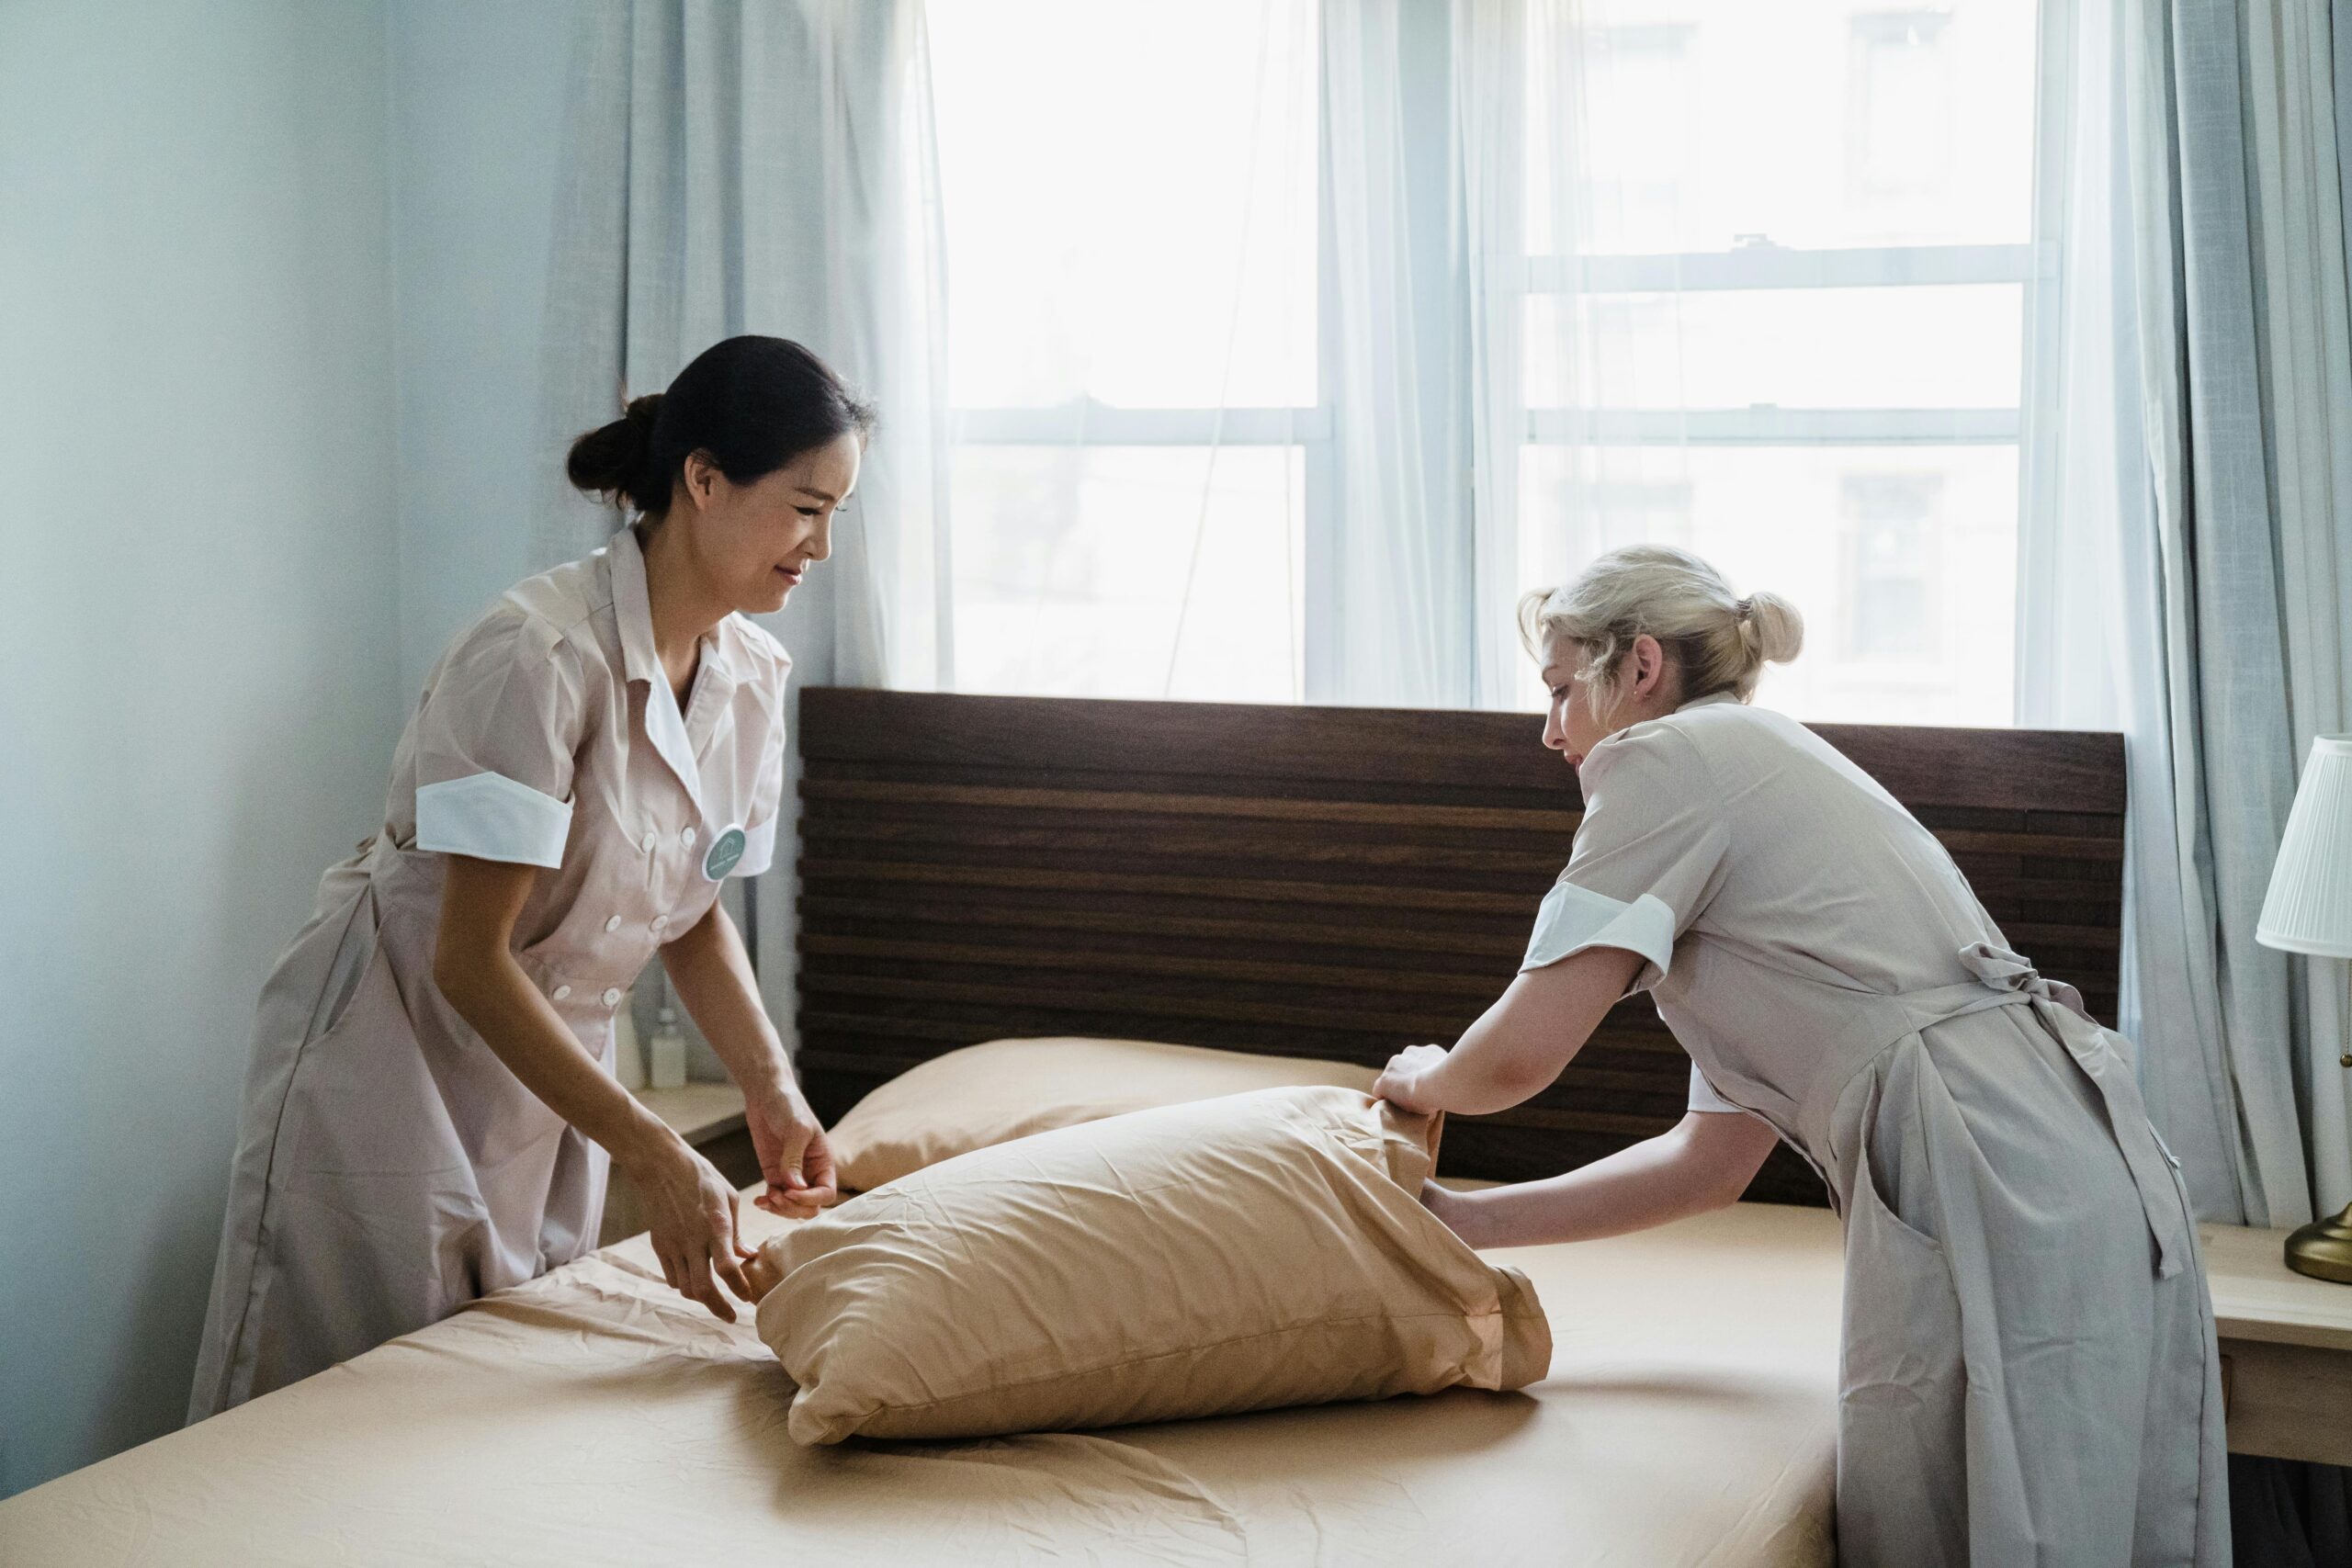 Know Some Specialties Of Foreign Domestic Workers